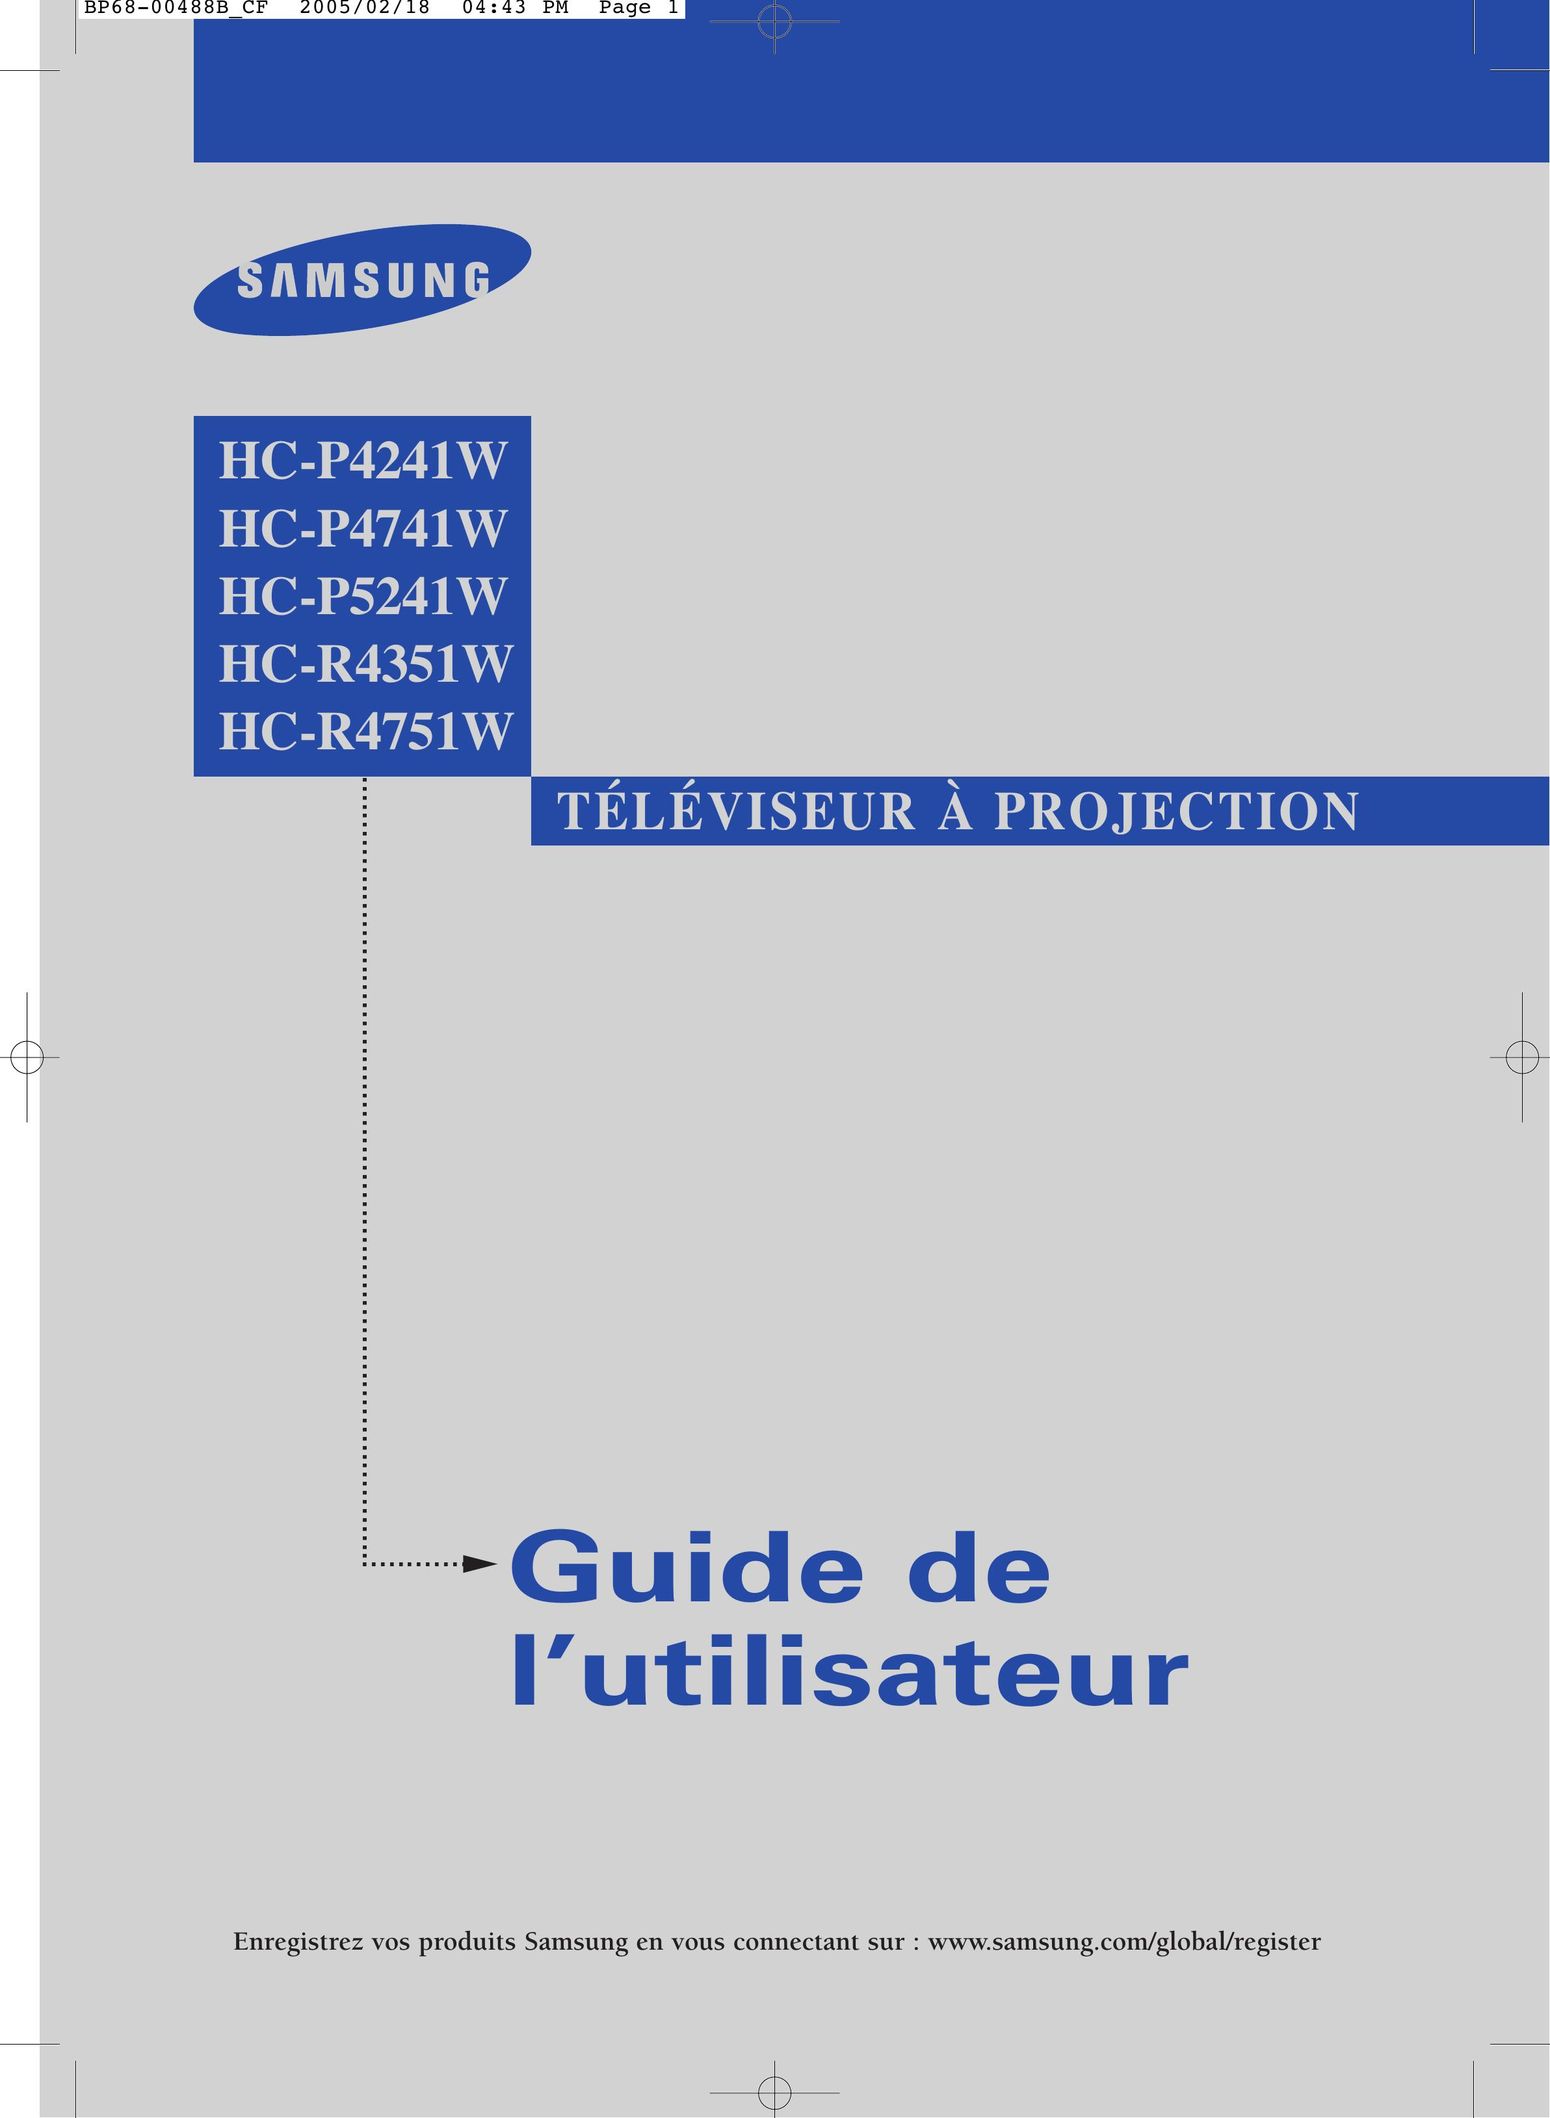 Samsung HC P4241W Projection Television User Manual